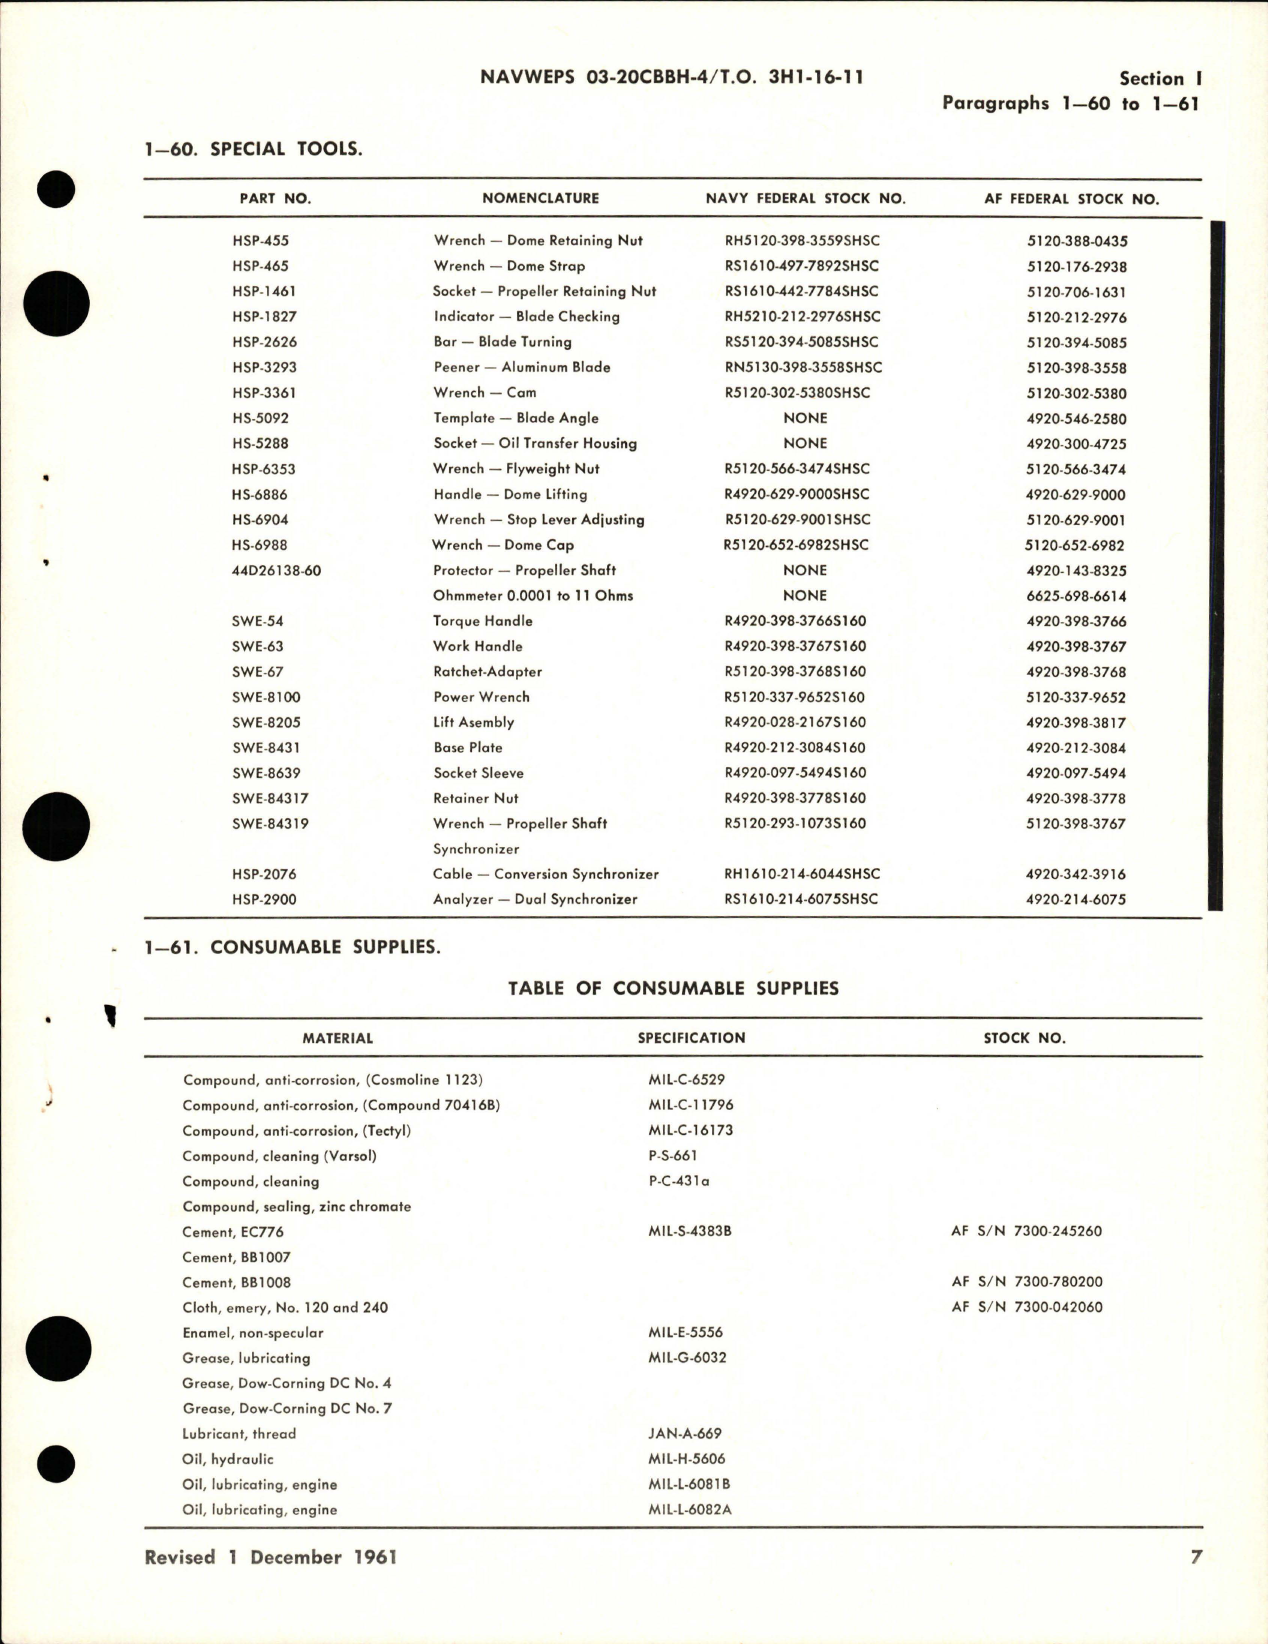 Sample page 5 from AirCorps Library document: Operation and Maintenance Instructions for Variable Pitch Propeller - Models 43H60-359, 43H60-383, and 43H60-395